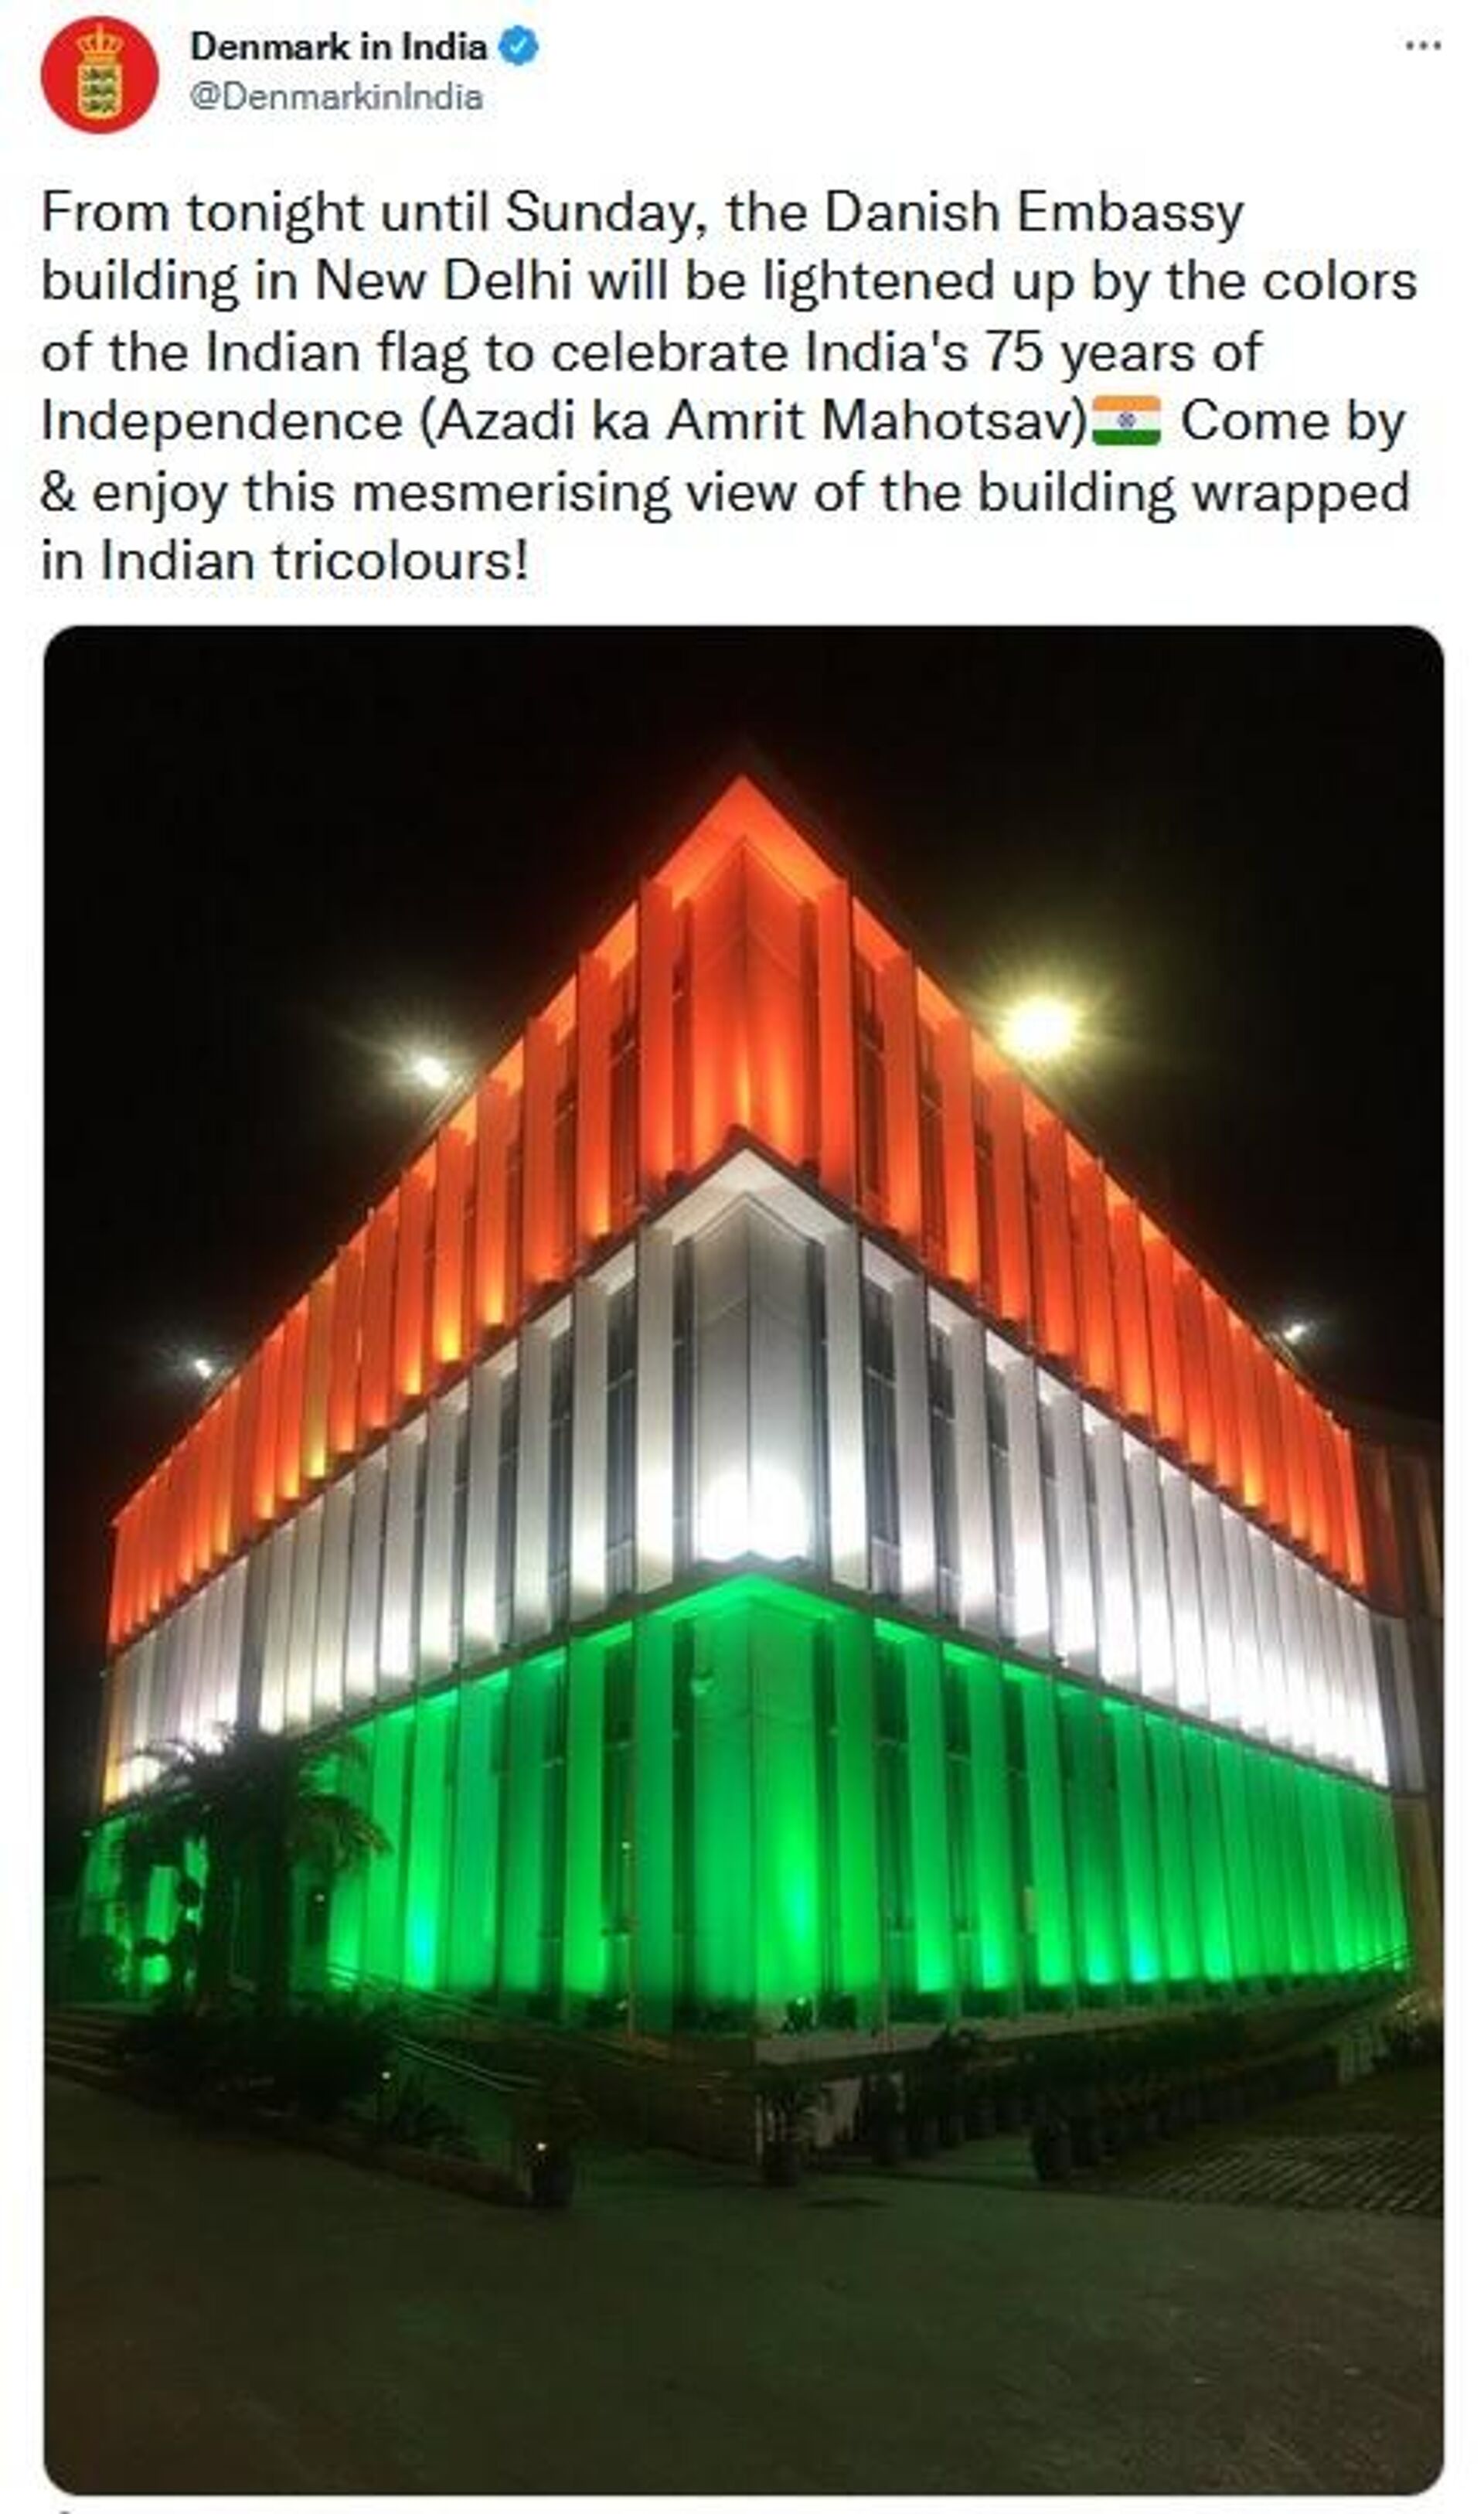 Denmark Embassy Lit Up in Tricolour to Celebrate 75 Years of India's Independence - Sputnik International, 1920, 23.02.2022